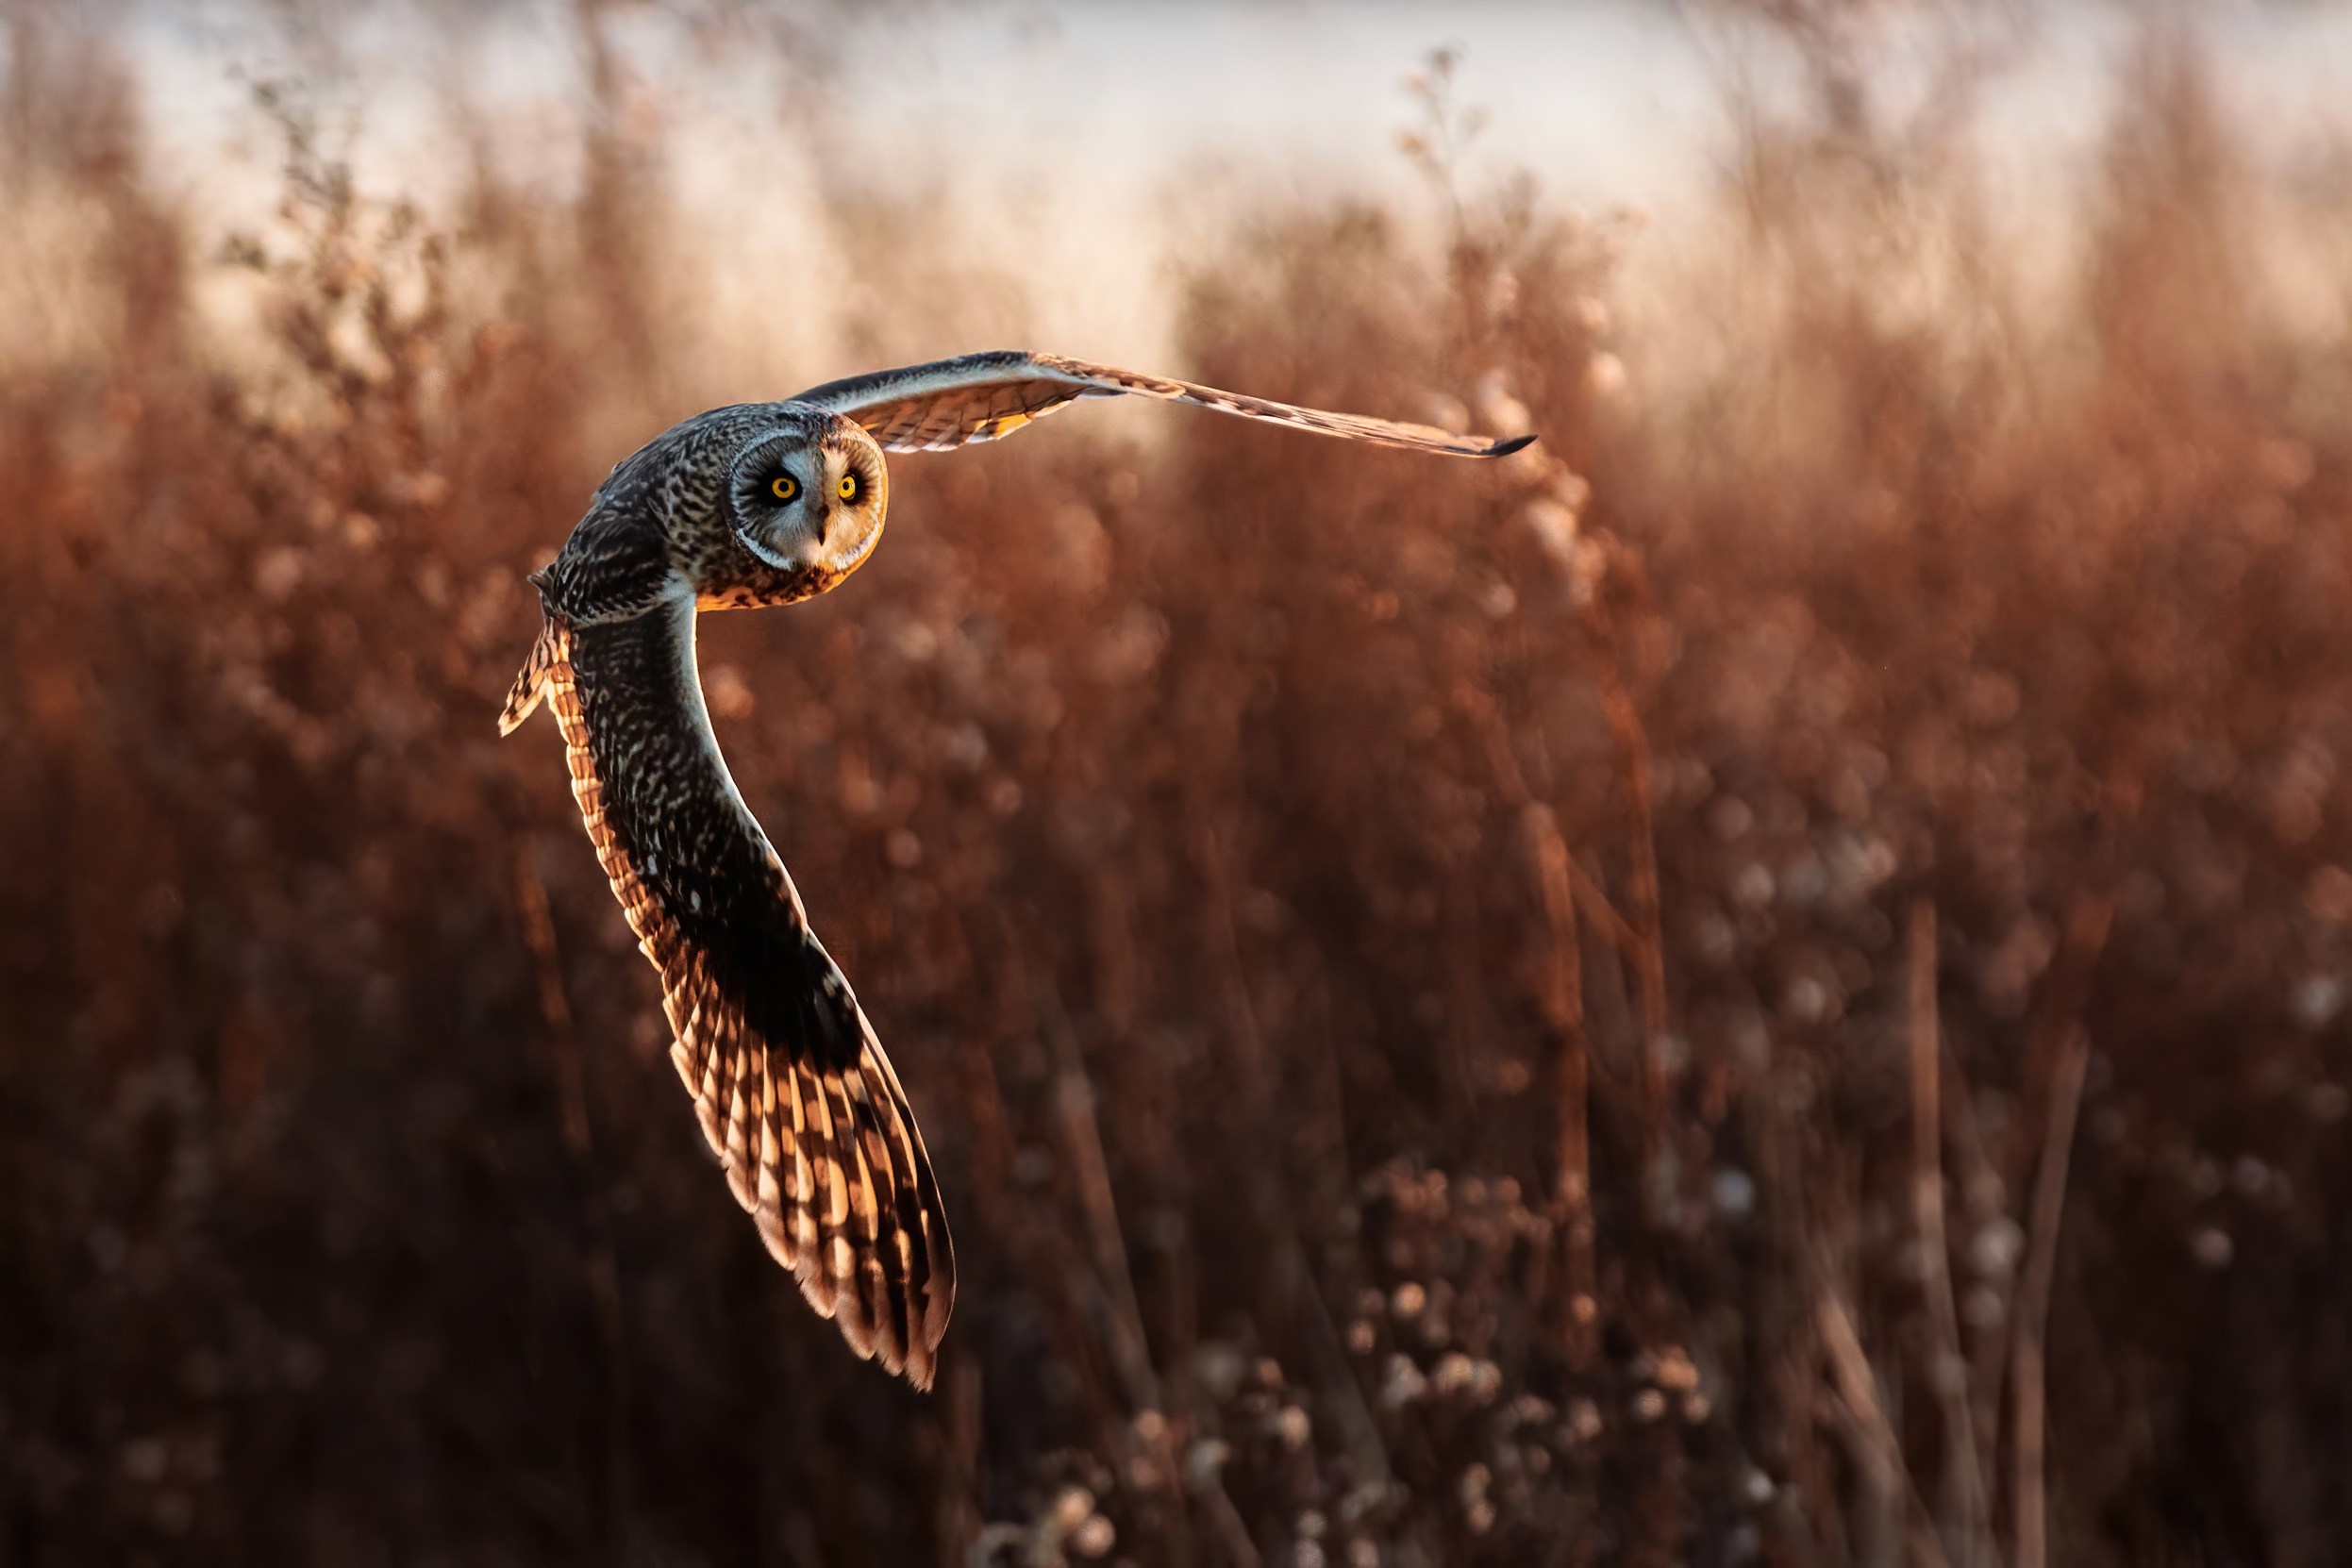 A lone Short-eared Owl in mid flight, hunting with their wings fully spread out.